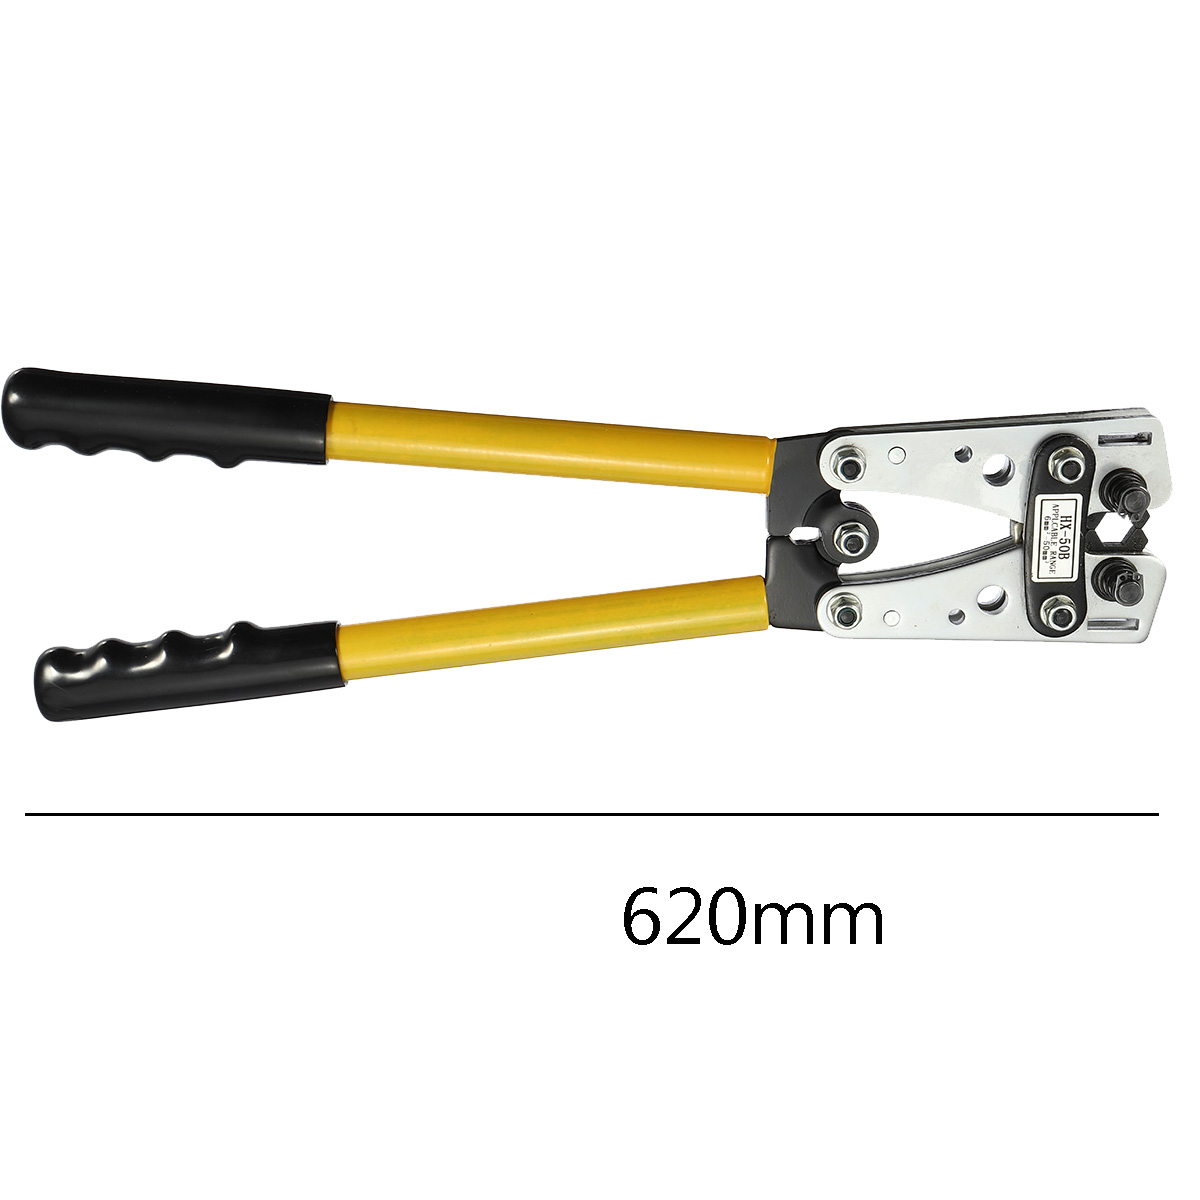 6-50-mm-Crimp-Tube-Terminal-Crimper-Plier-Tool-Battery-Cable-Lugs-Hex-Crimping-Tool-Cable-Terminal-P-1549269-7